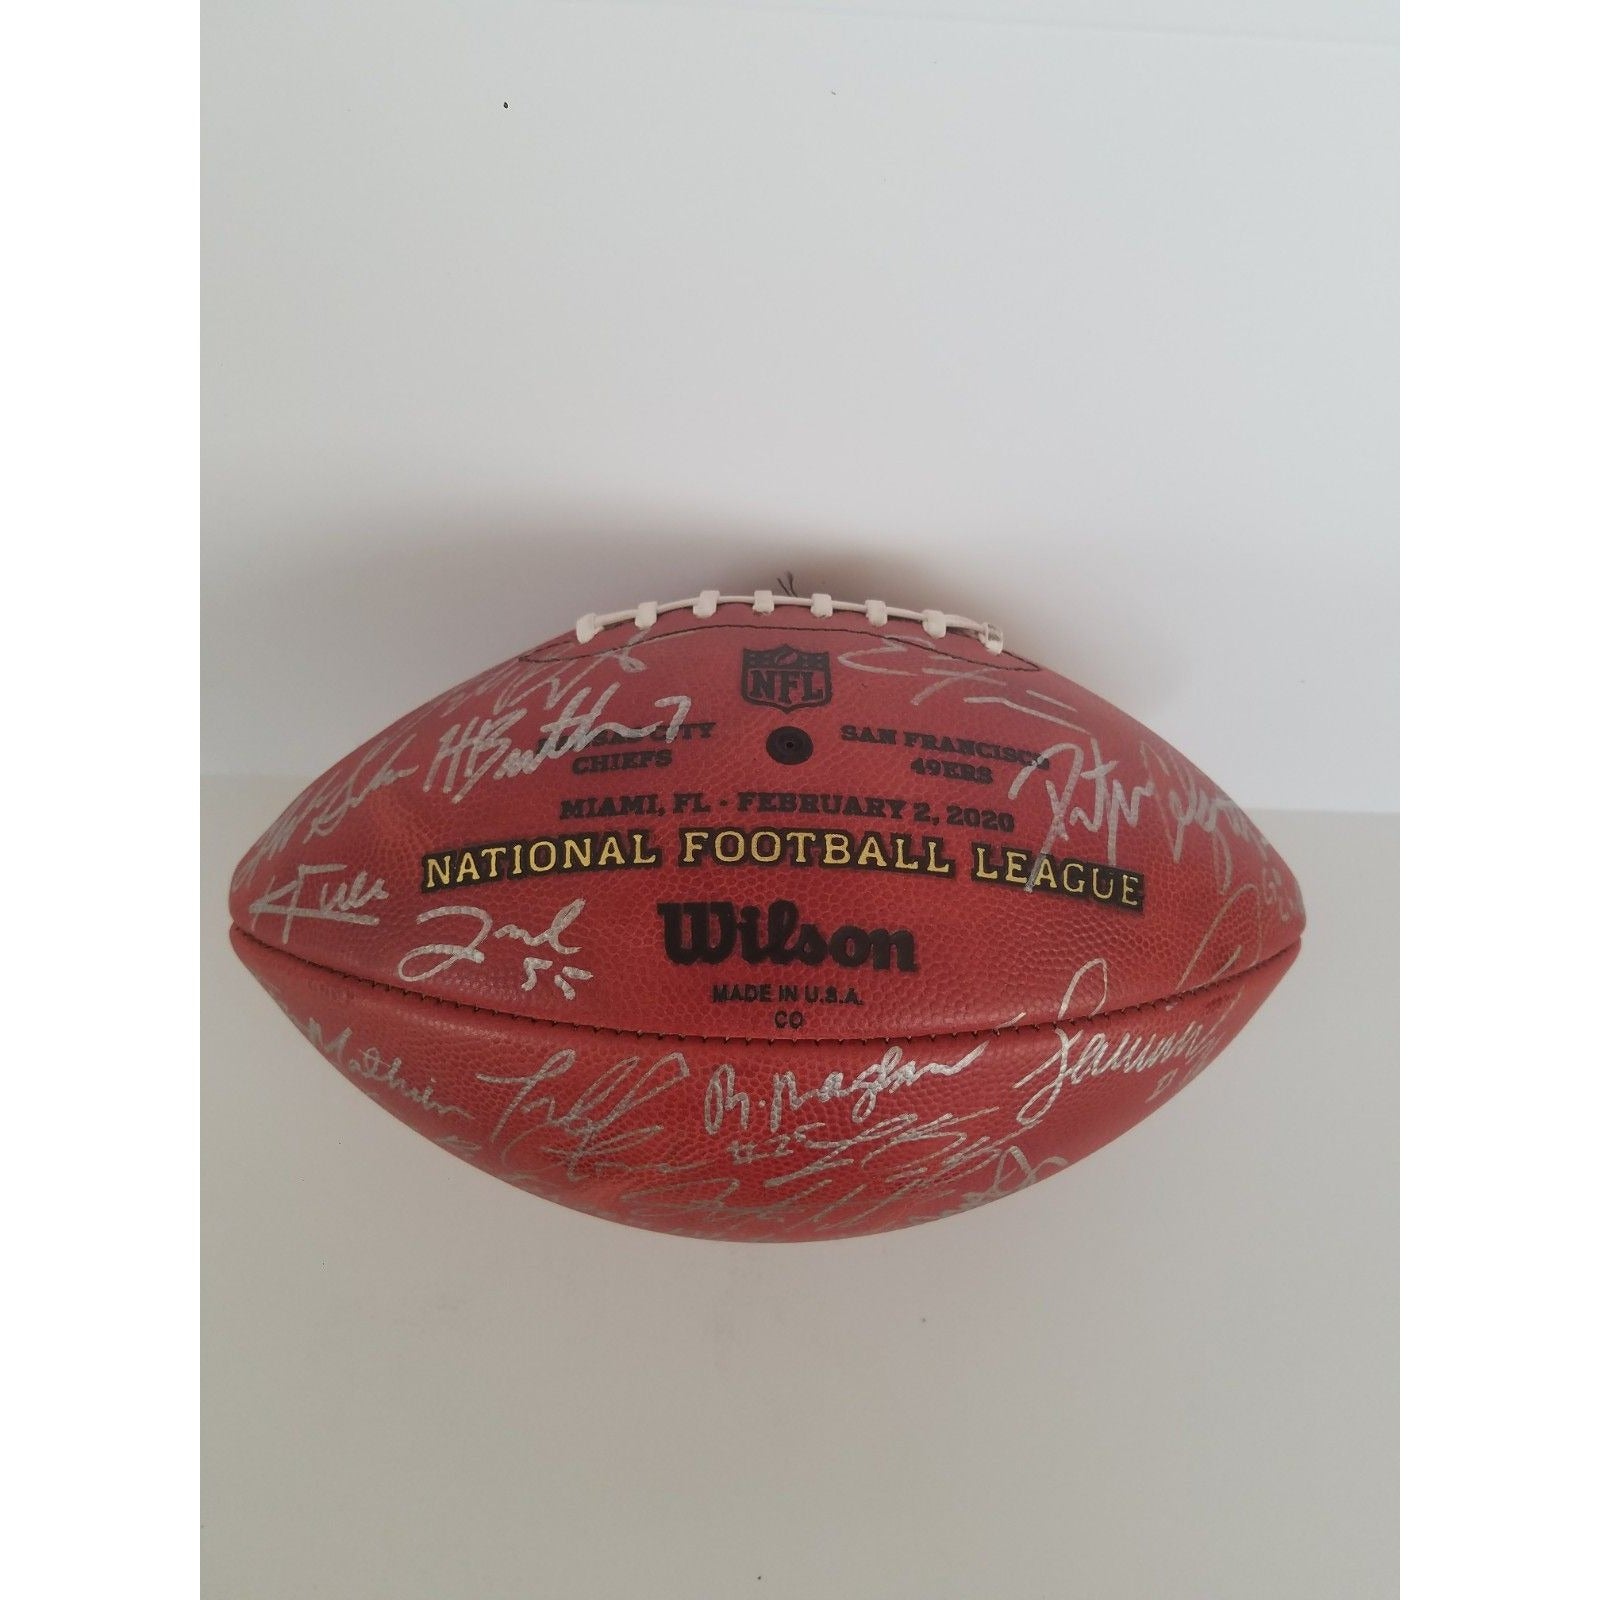 Patrick Mahomes, Andy Reid, Travis Kelce, Tyreek Hill, 2020 Kansas City Chiefs Super Bowl champions NFL game ball signed with proof